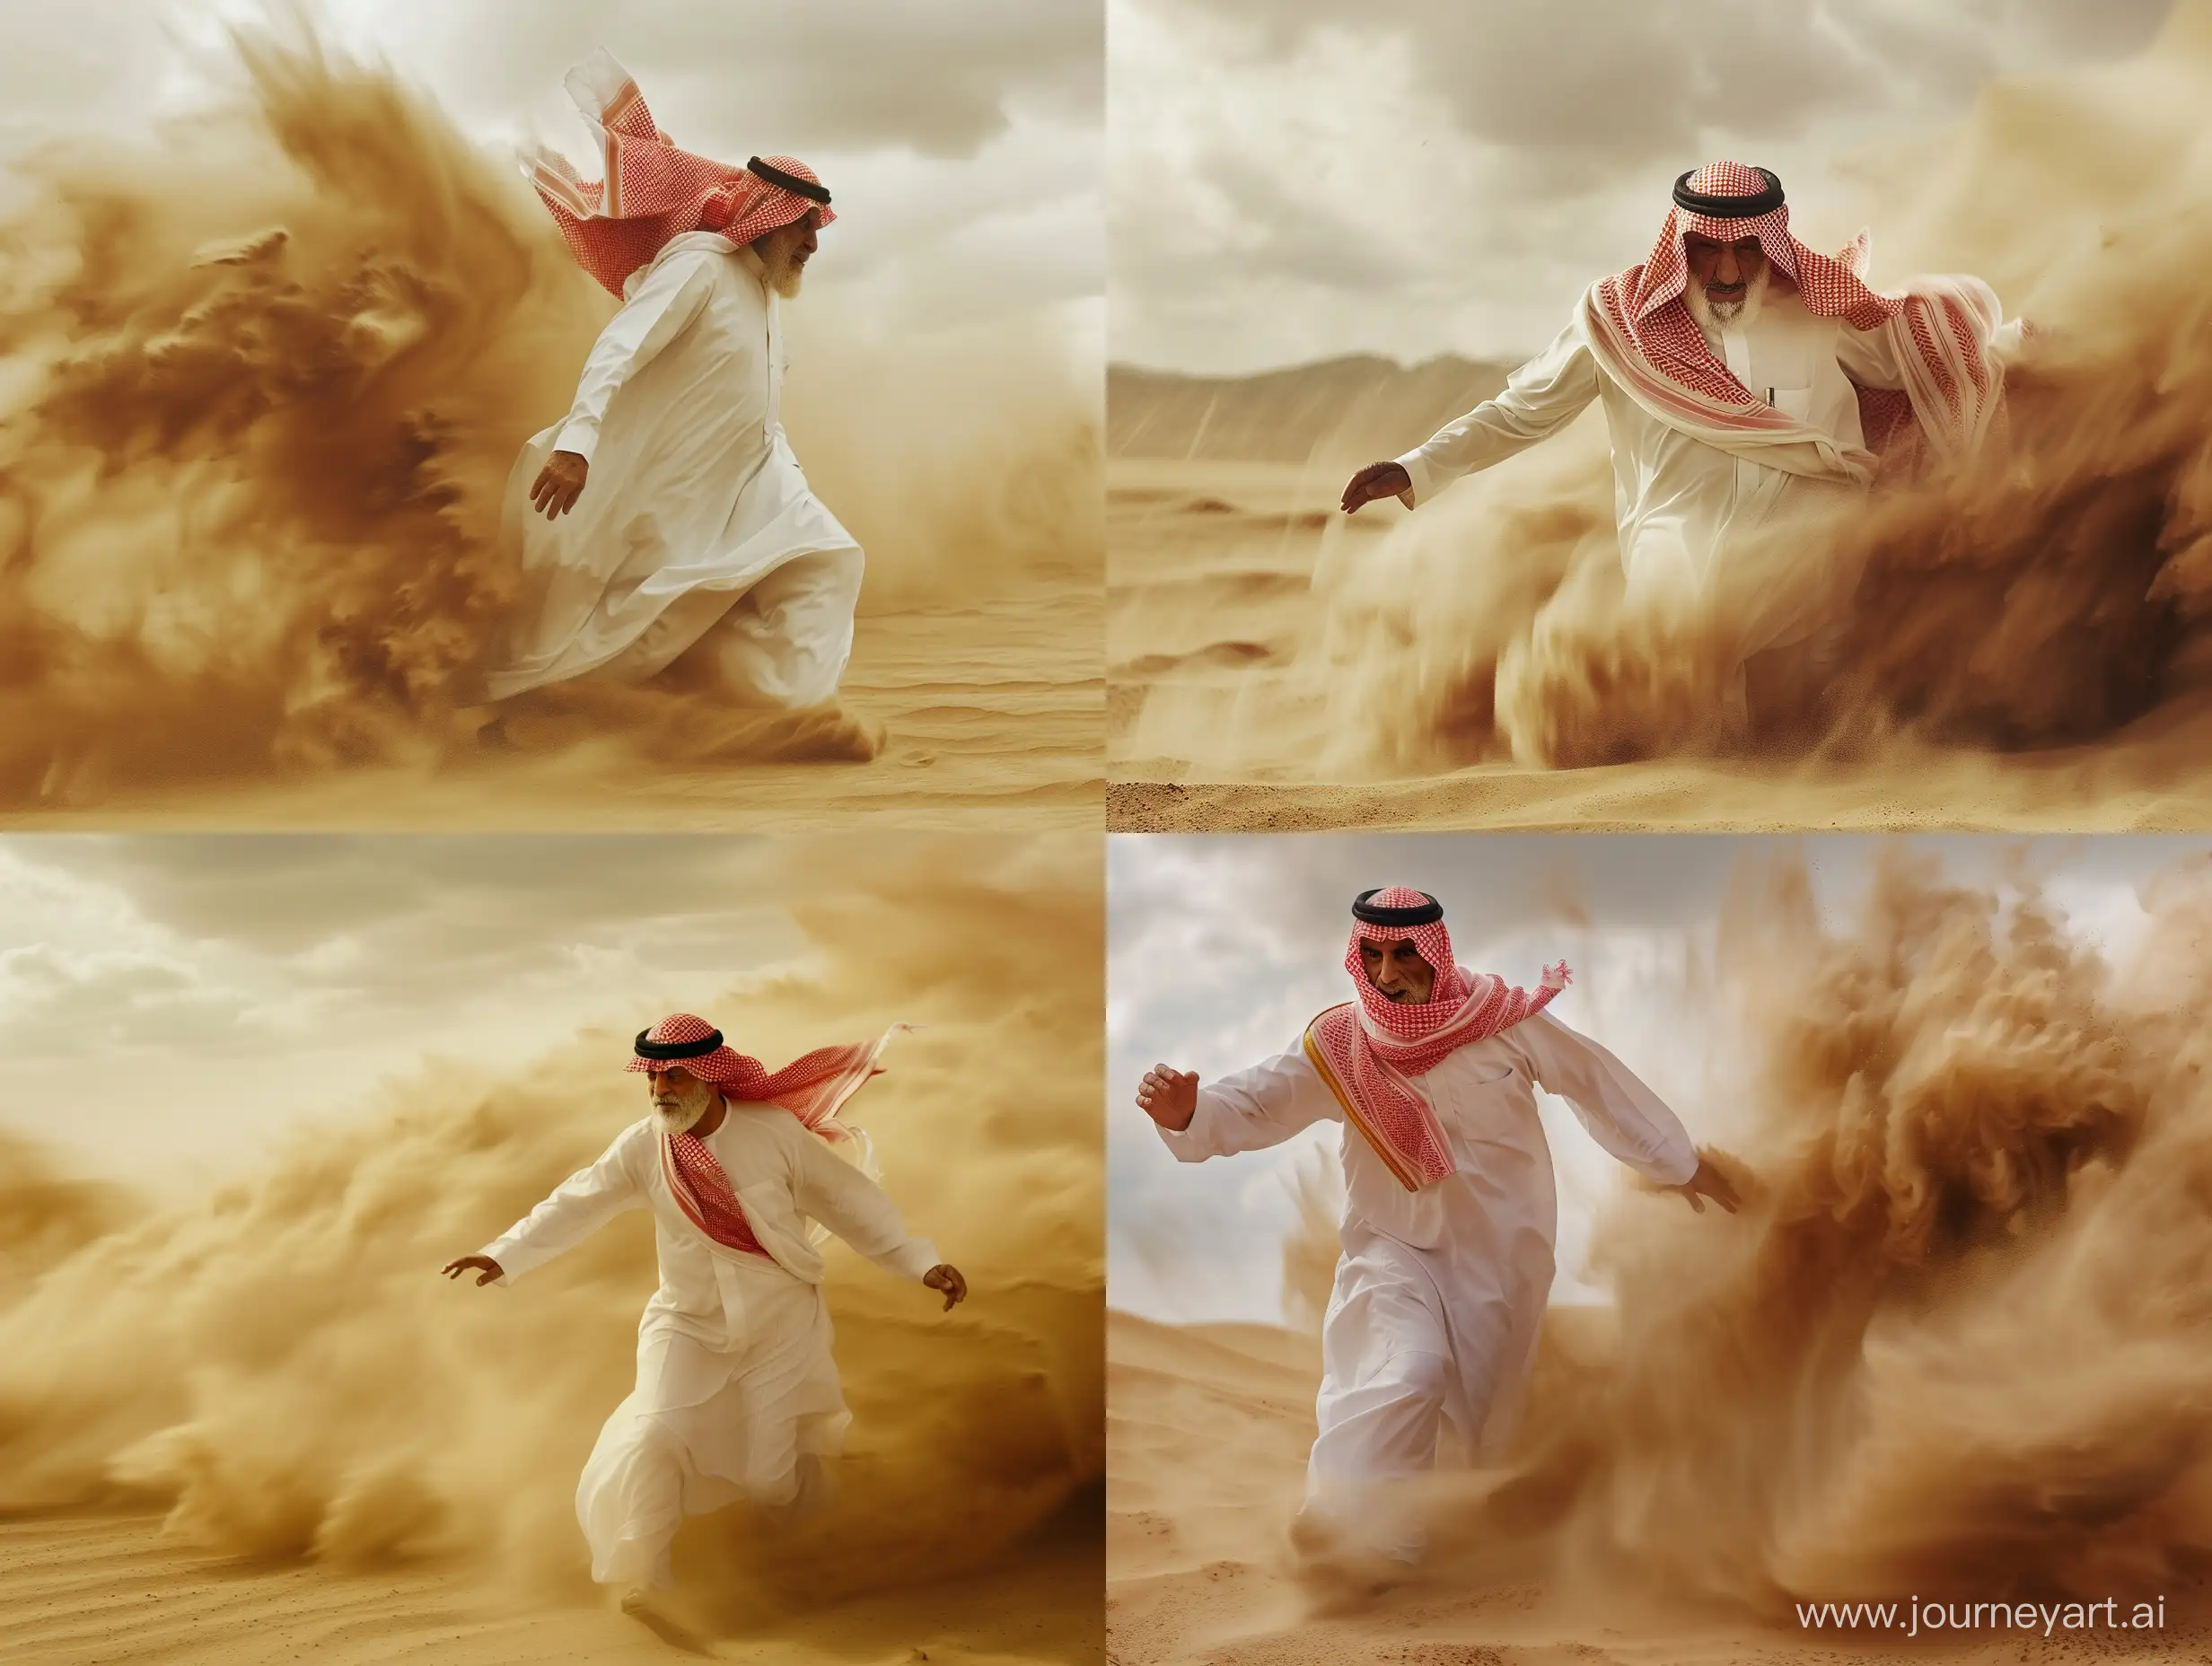 An opening image of an old Saudi prince wearing the traditional white Saudi dress and red shemagh, disappearing in a sandstorm on a desert-like the style of a cinematic masterpiece, professional cinematography, shallow depth of field, subject in focus, professional color grading, precise dynamic movement, cinematic film Professional film camera